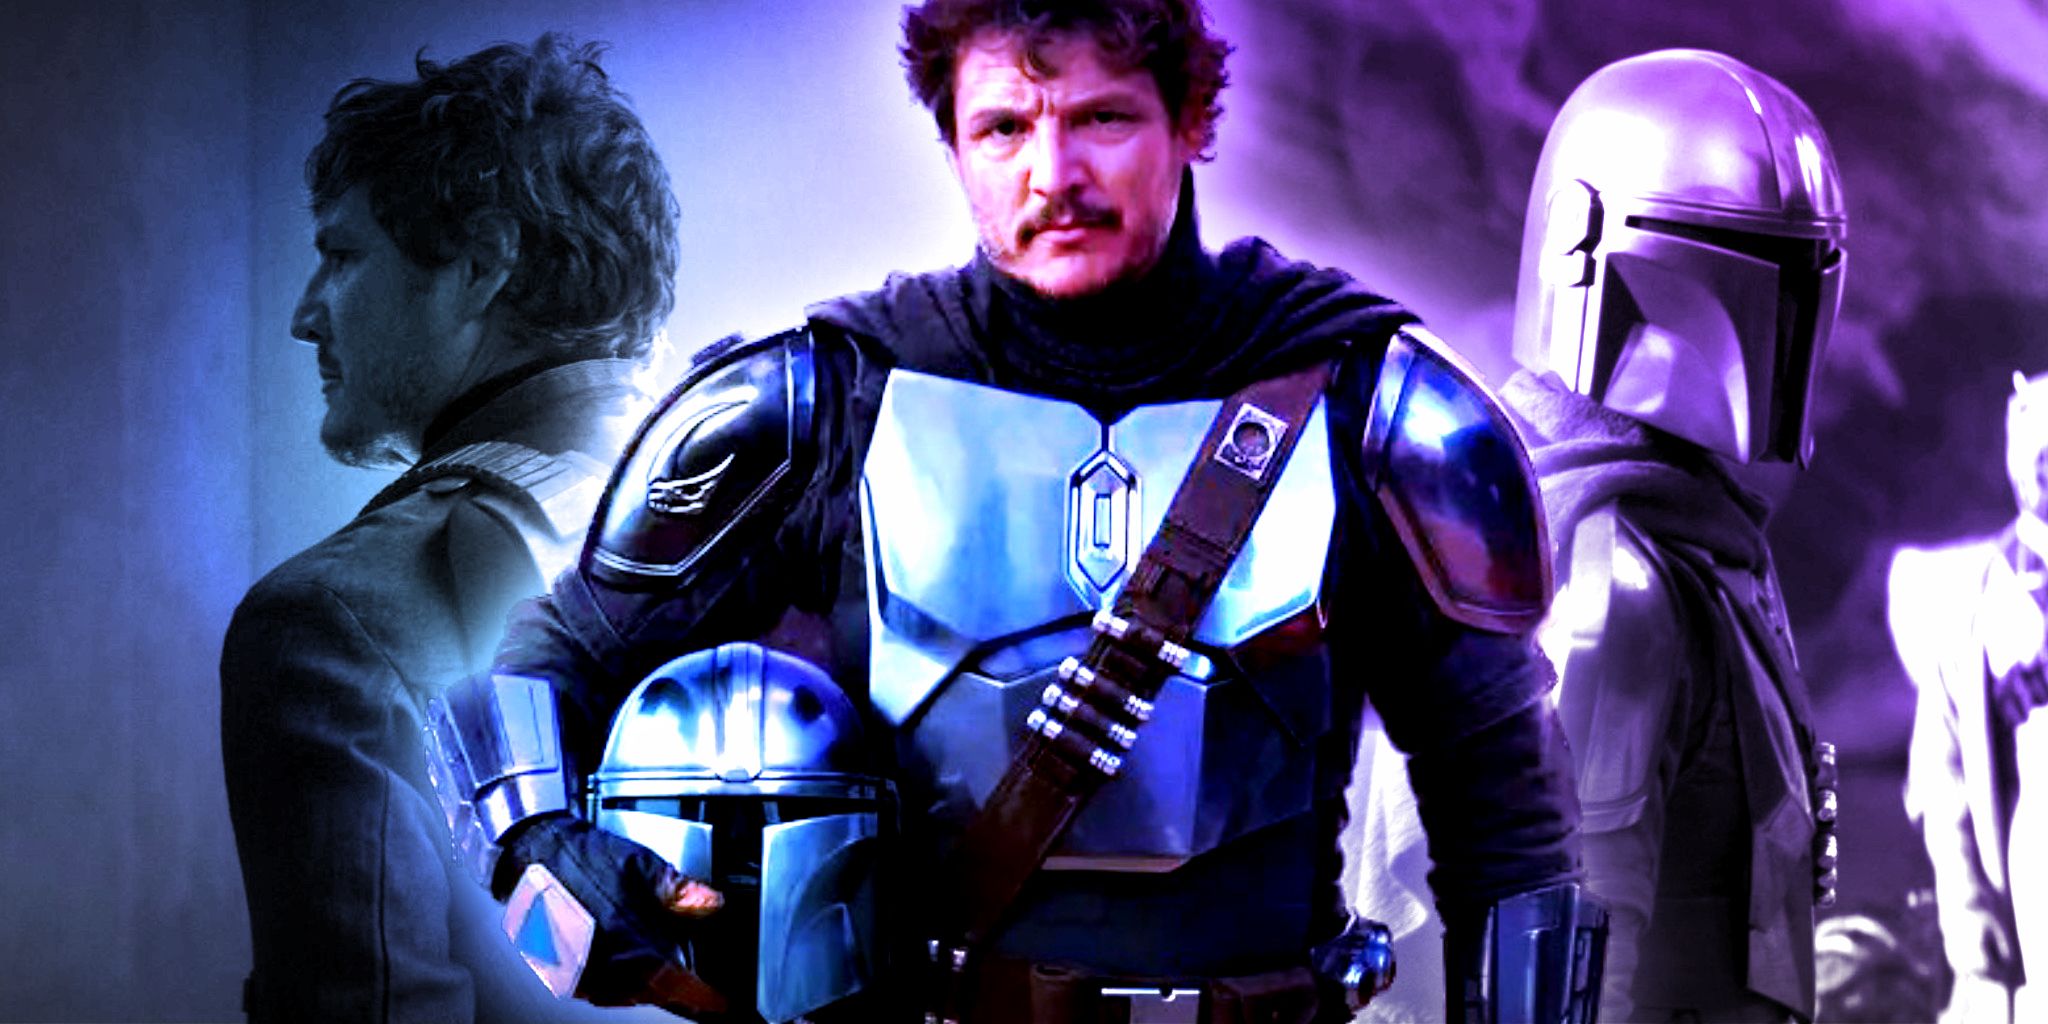 Pedro Pascal as Din Djarin with his helmet in the foreground, with Morak Din and helmeted Din in the background.